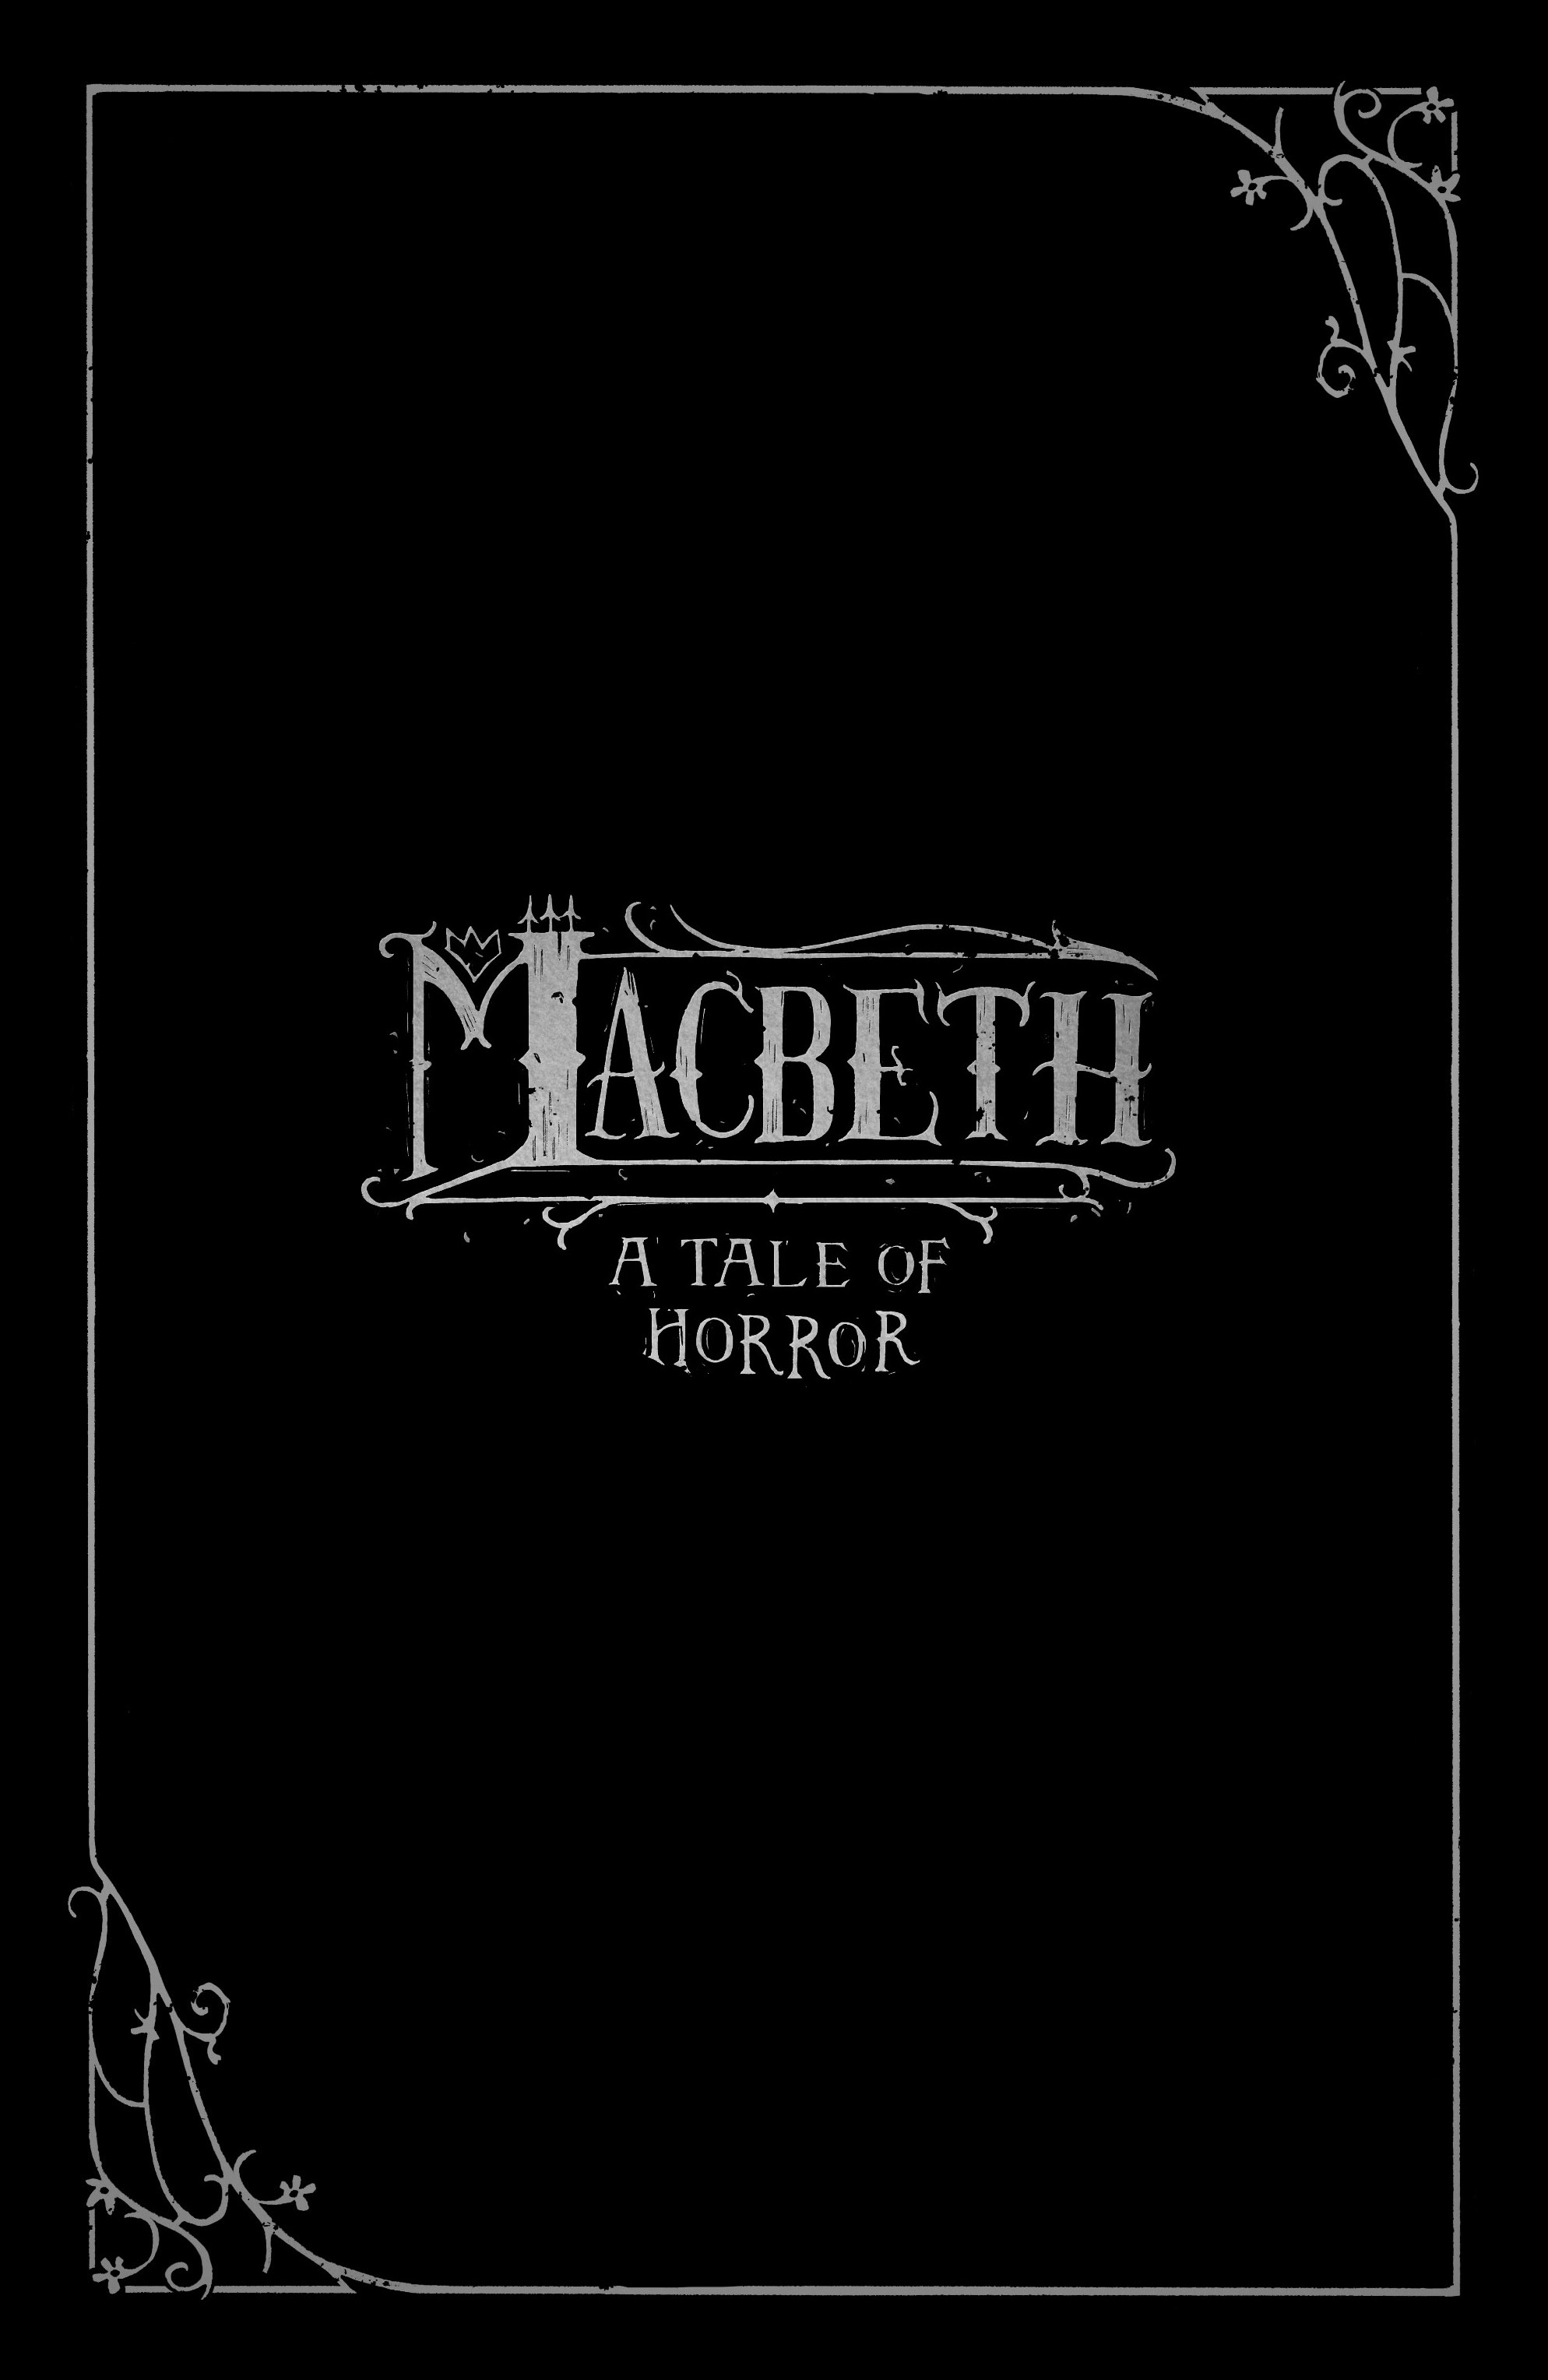 Read online Macbeth: A Tale of Horror comic -  Issue # TPB - 2